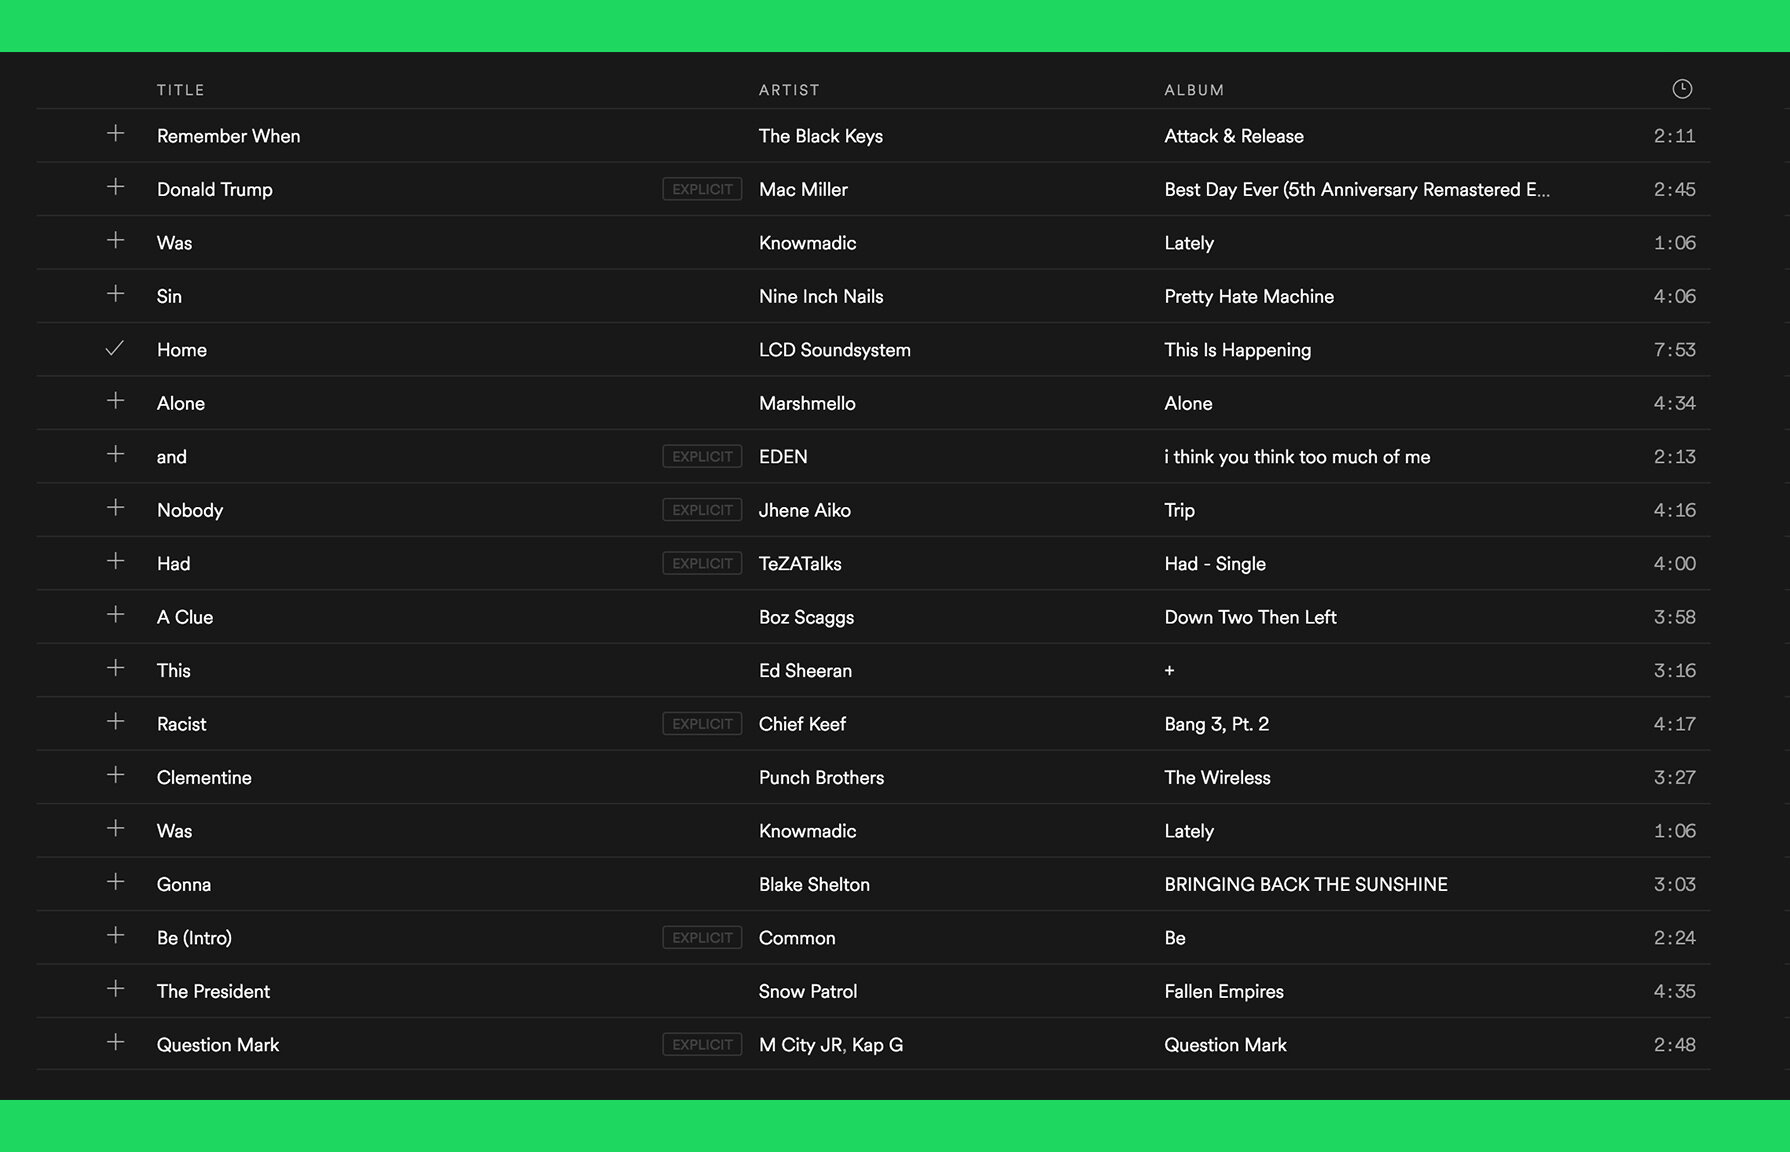 Home Alone: The Playlist